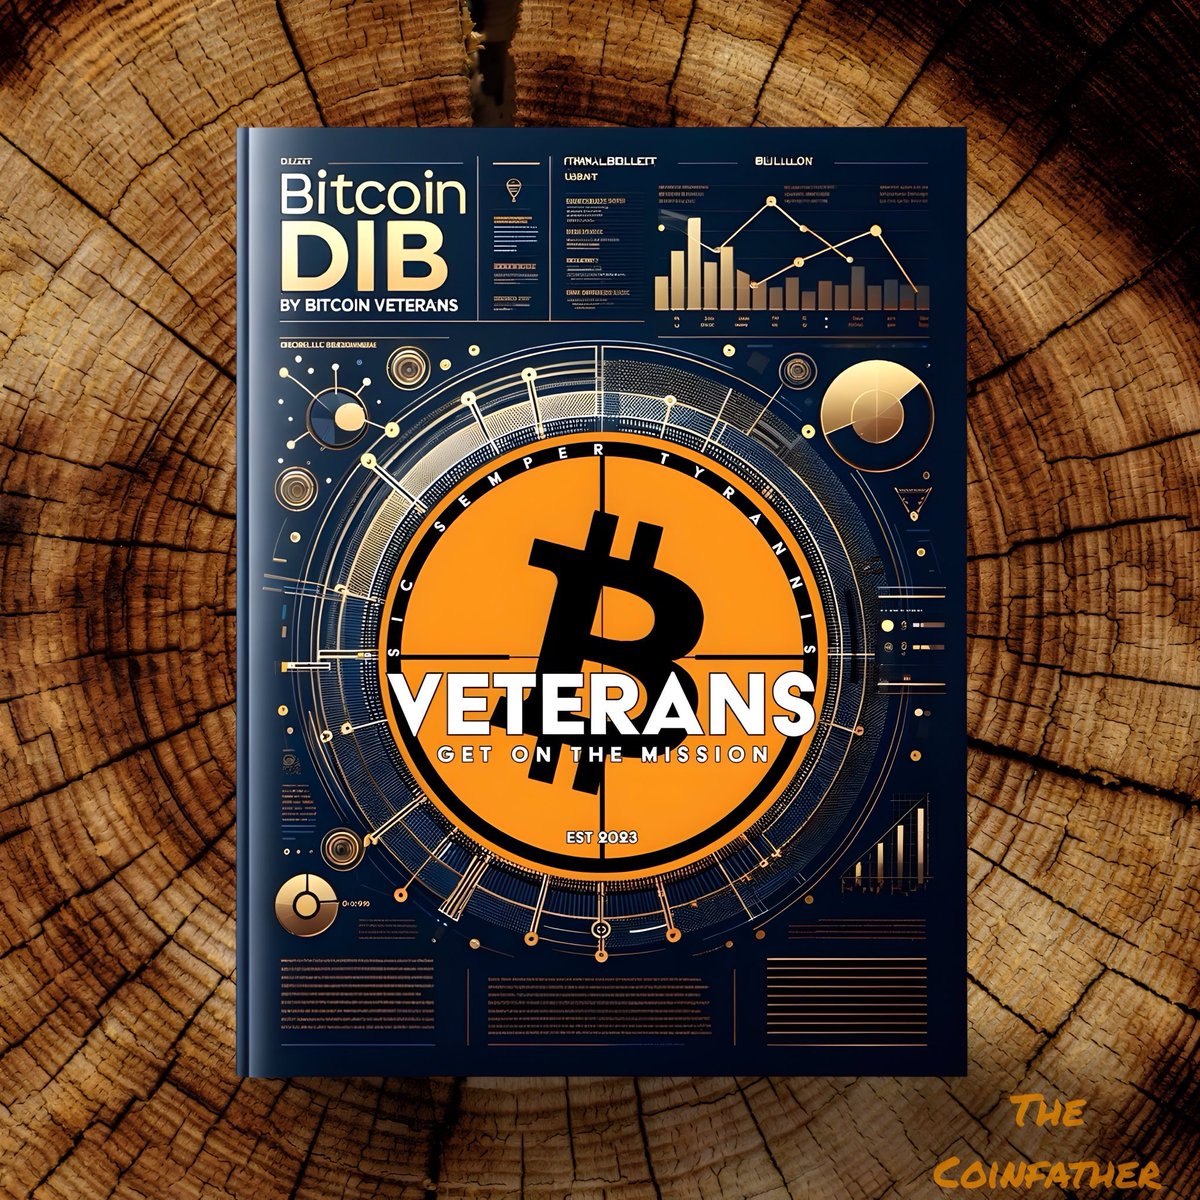 BTC Daily Intelligence Bulletin (DIB)
Block: 840,338
DTG/ICOD: 0800EST 22Apr24
Precedence: Routine (RR)
Controls: Public Release 
QQQQ
__________________________
BLUF: Israel Intel Chief Resigns / Global Defense Expenditures at ATH / ARSOF Using Deef Fakes for 5GW / Columbia,